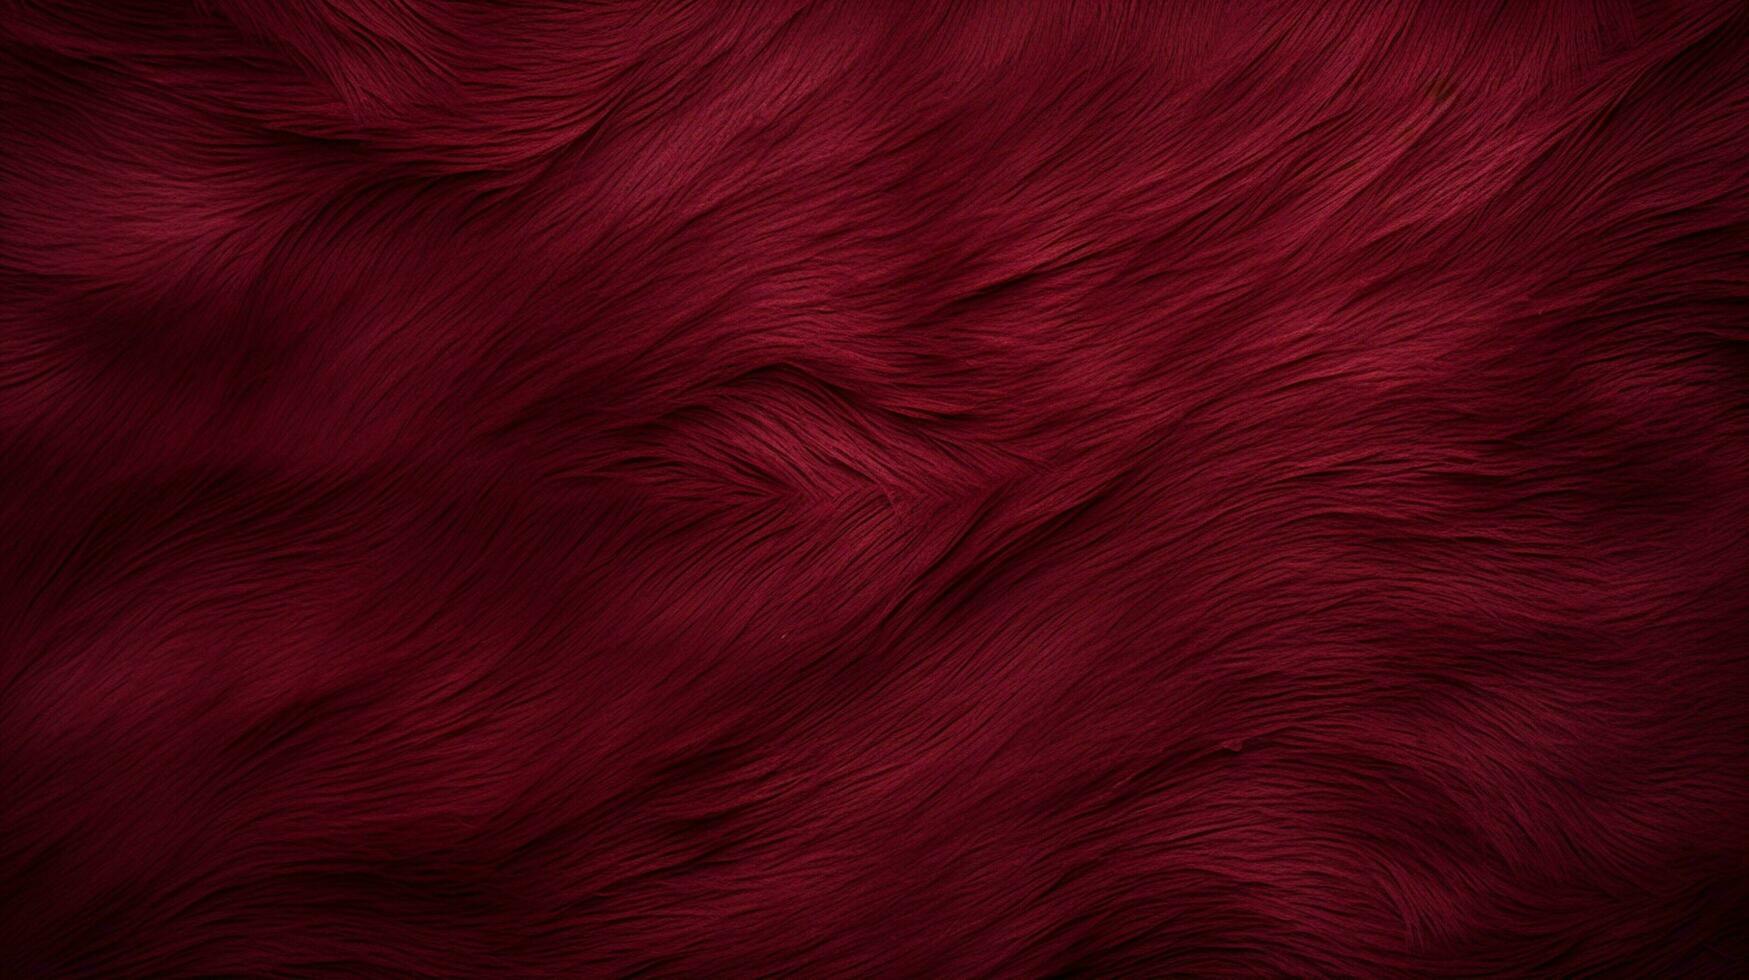 Red Fur Texture Picture, Free Photograph